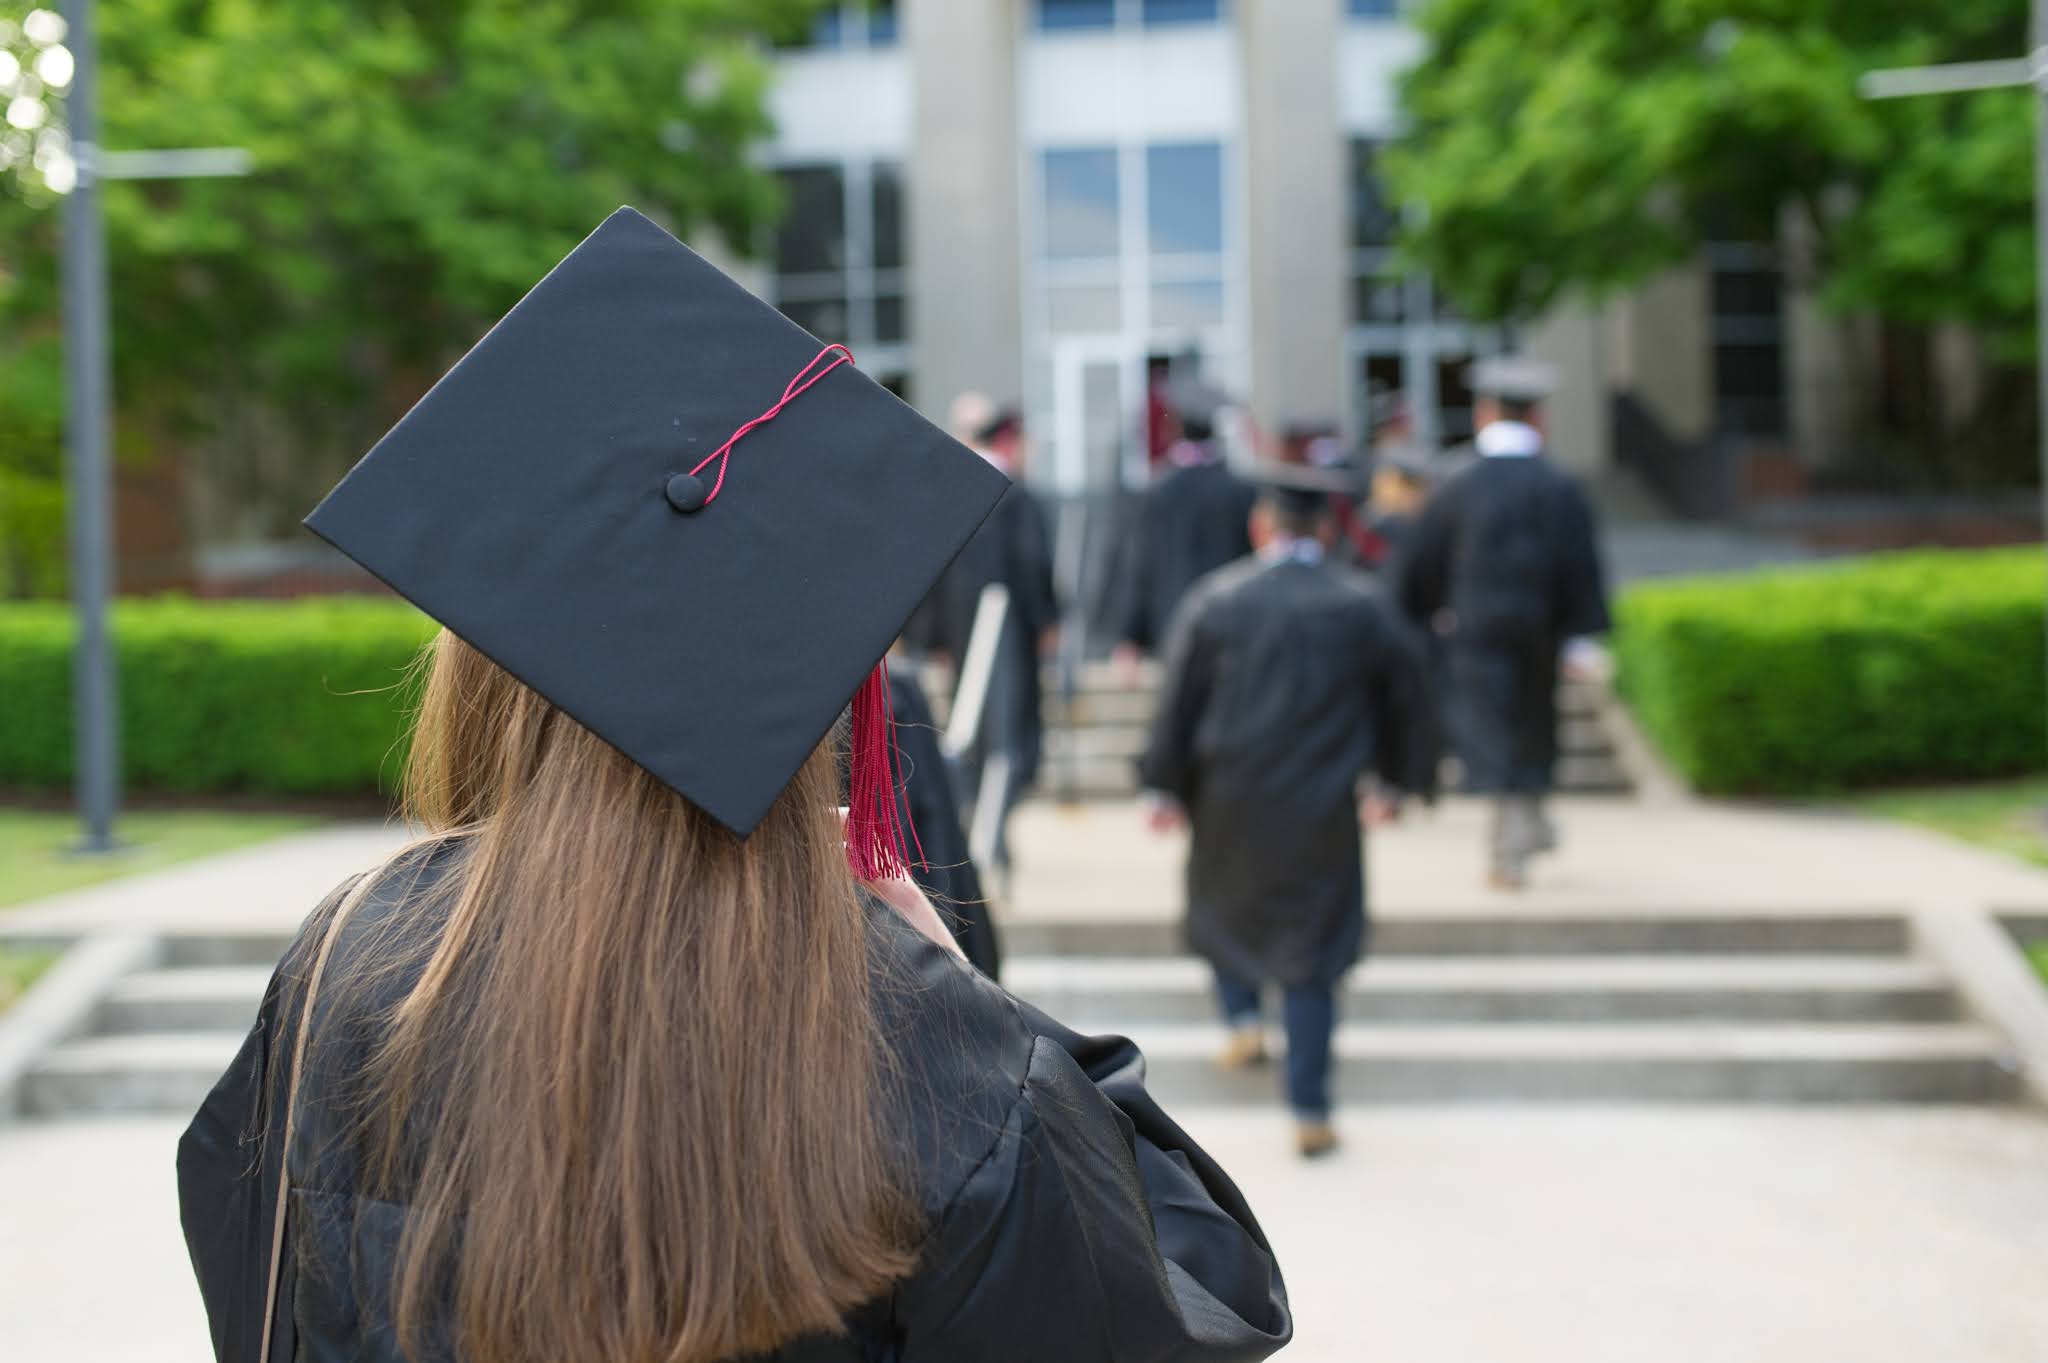 Transylvania updates plans for May commencement ceremonies